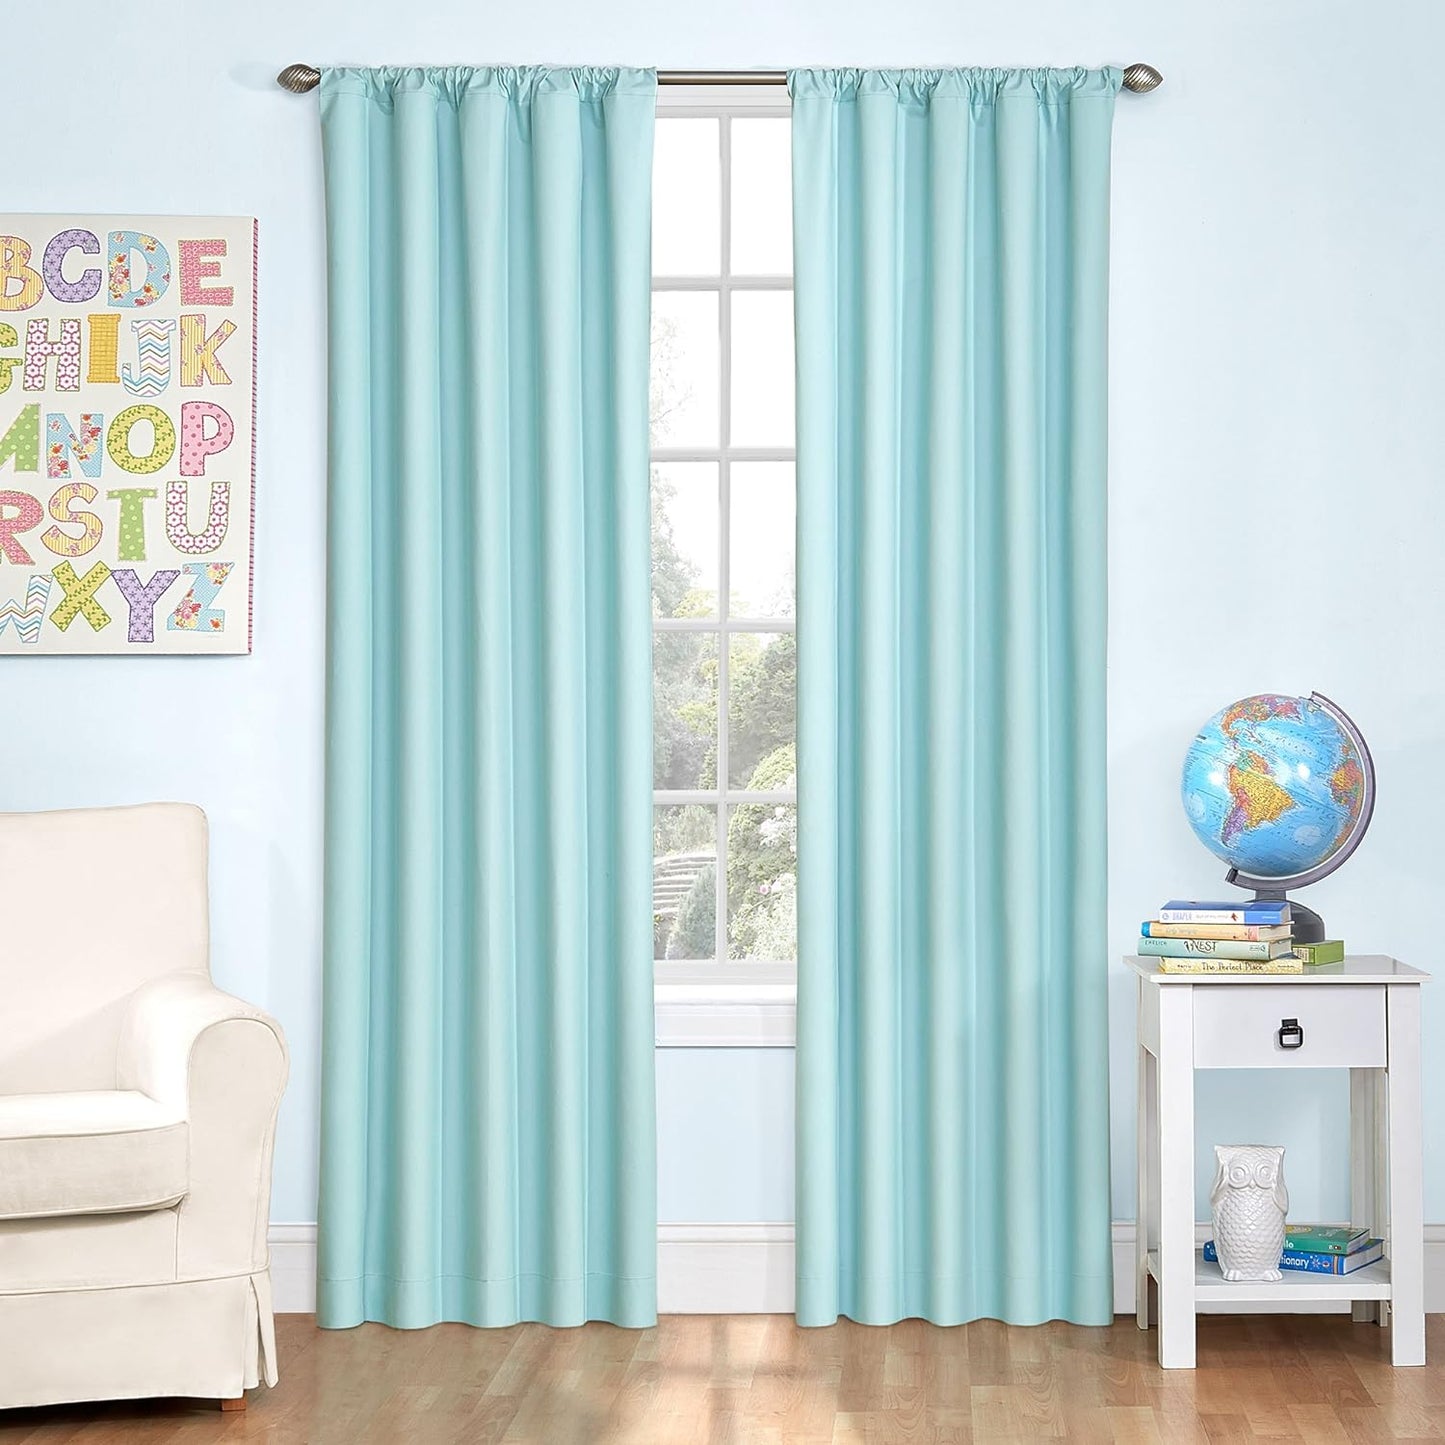 ECLIPSE Blackout Thermal Rod Pocket Window Curtain for Bedroom or Nursery (1 Panel)  Keeco LLC Blue 42 In X 63 In 